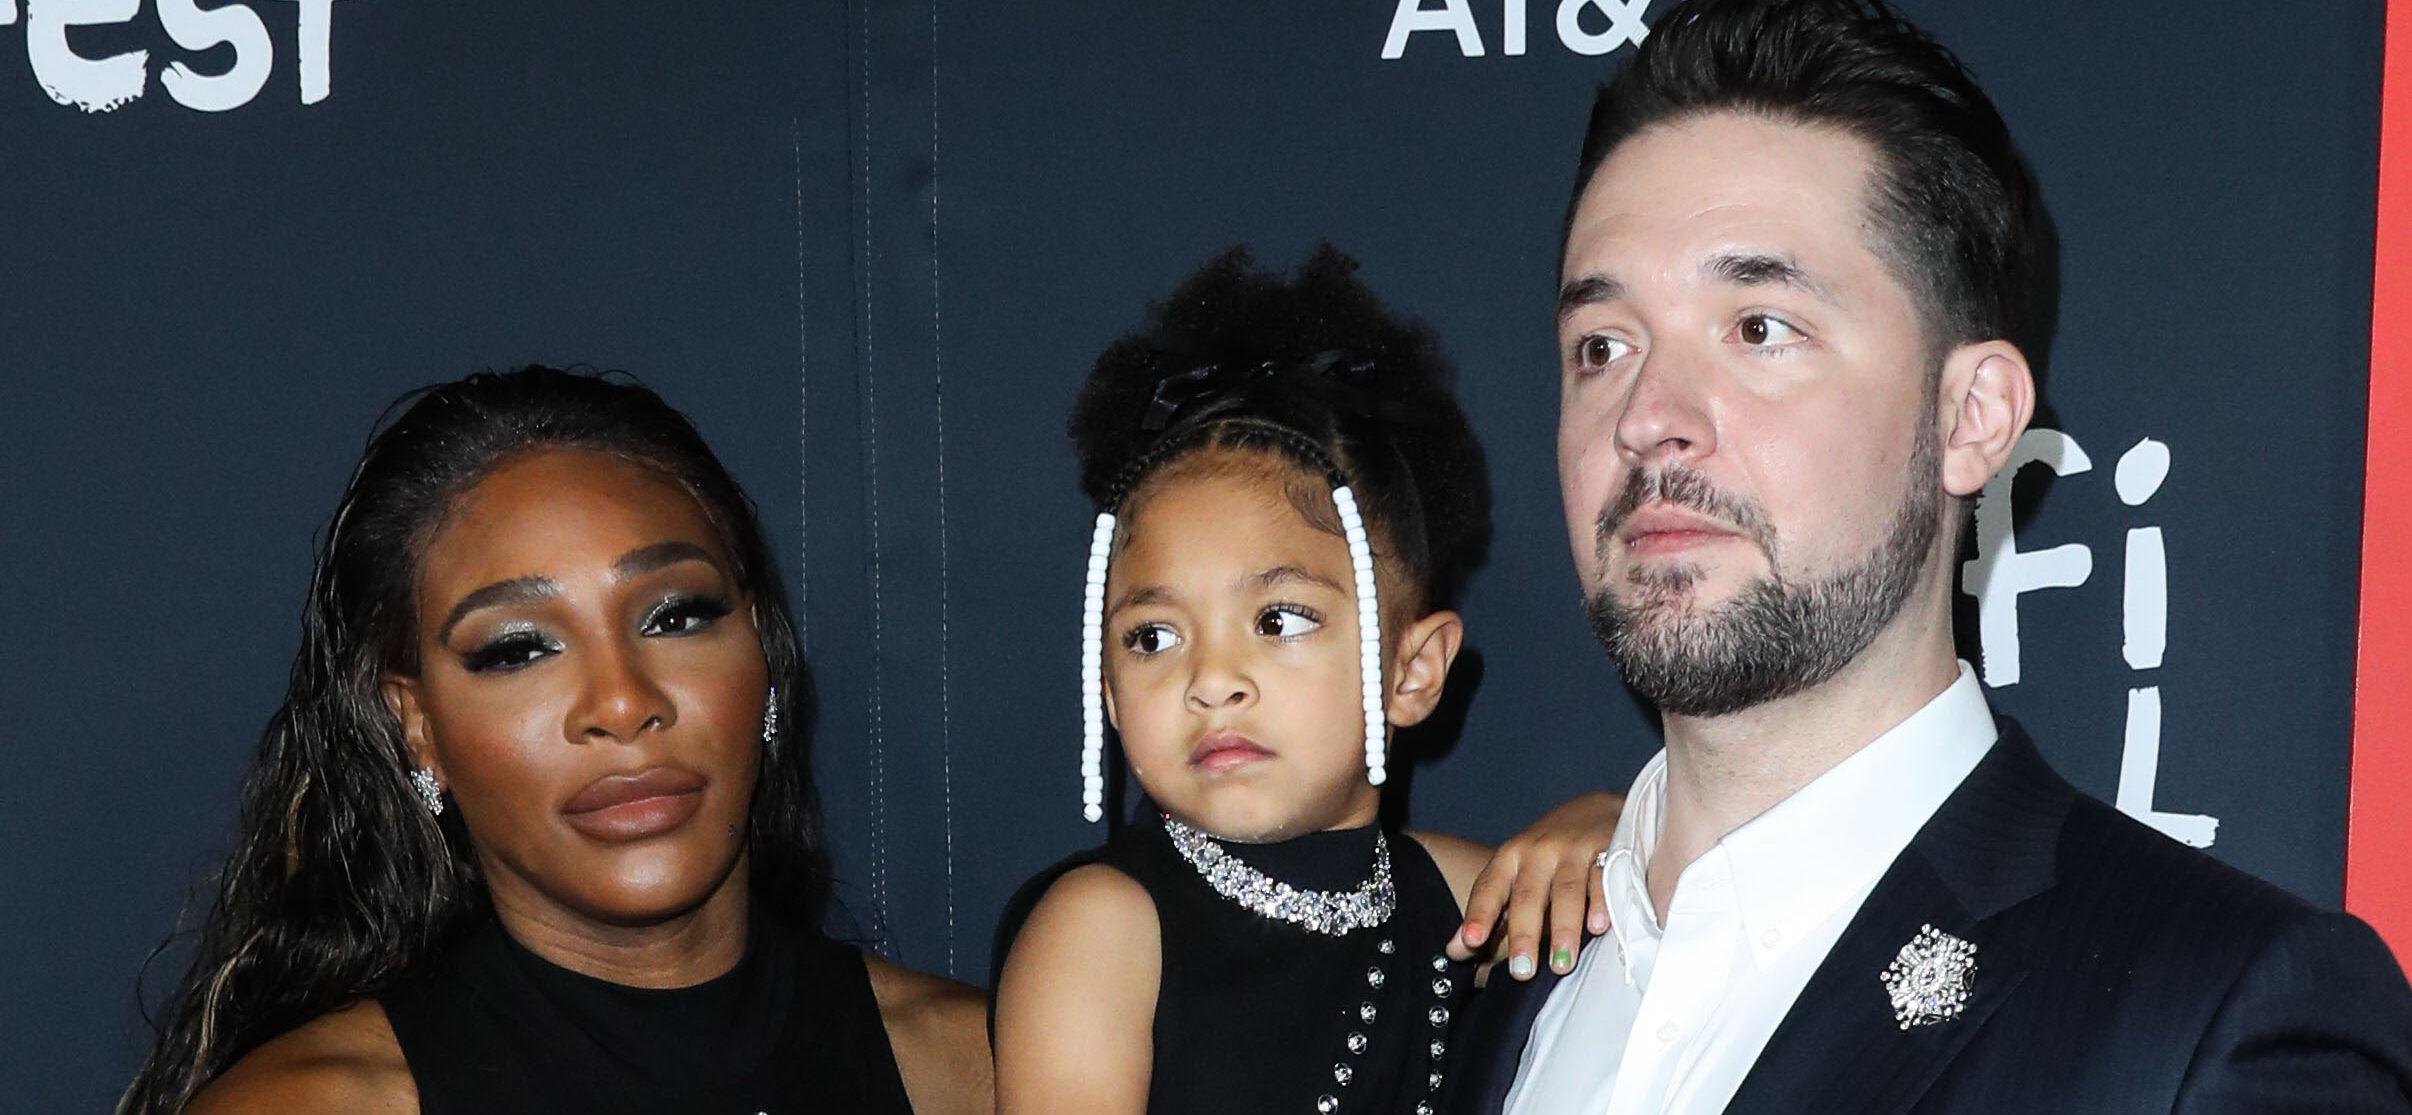 Serena Williams and family at the 2021 AFI Fest - Closing Night Premiere Of Warner Bros. Pictures' 'King Richard'